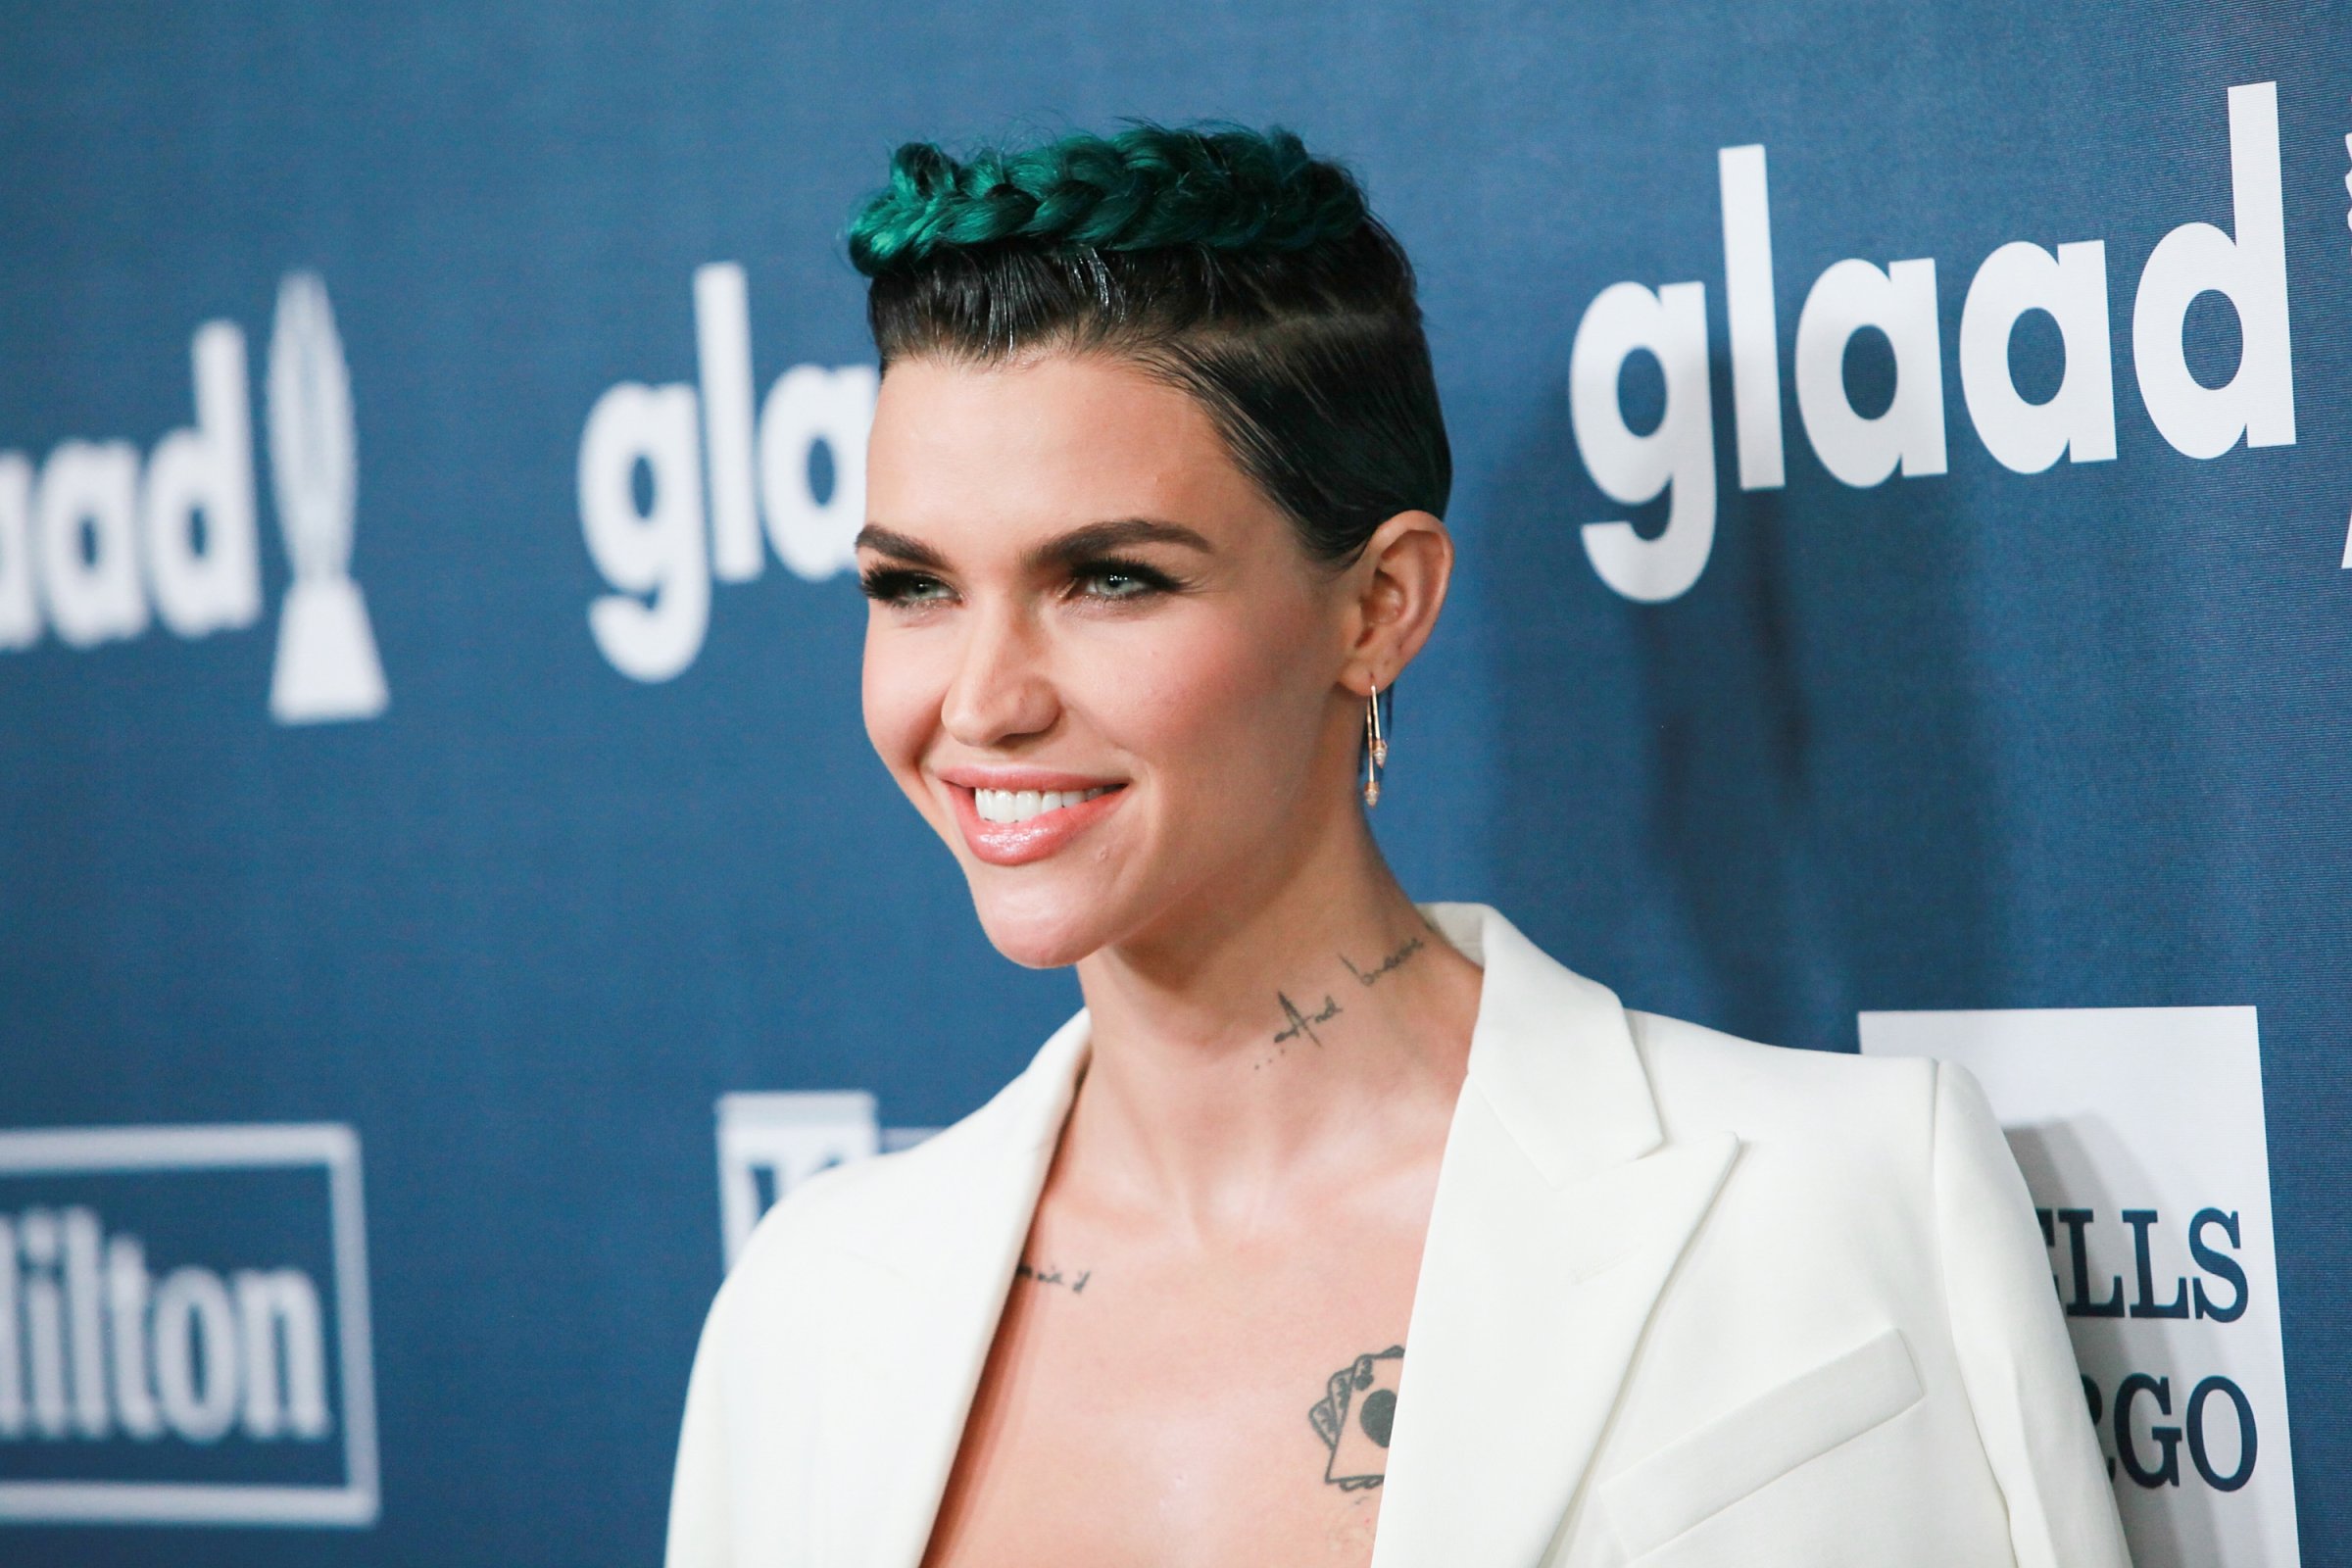 Honoree Ruby Rose arrives at the 27th Annual GLAAD Media Awards at The Beverly Hilton Hotel on April 2, 2016 in Beverly Hills, California.